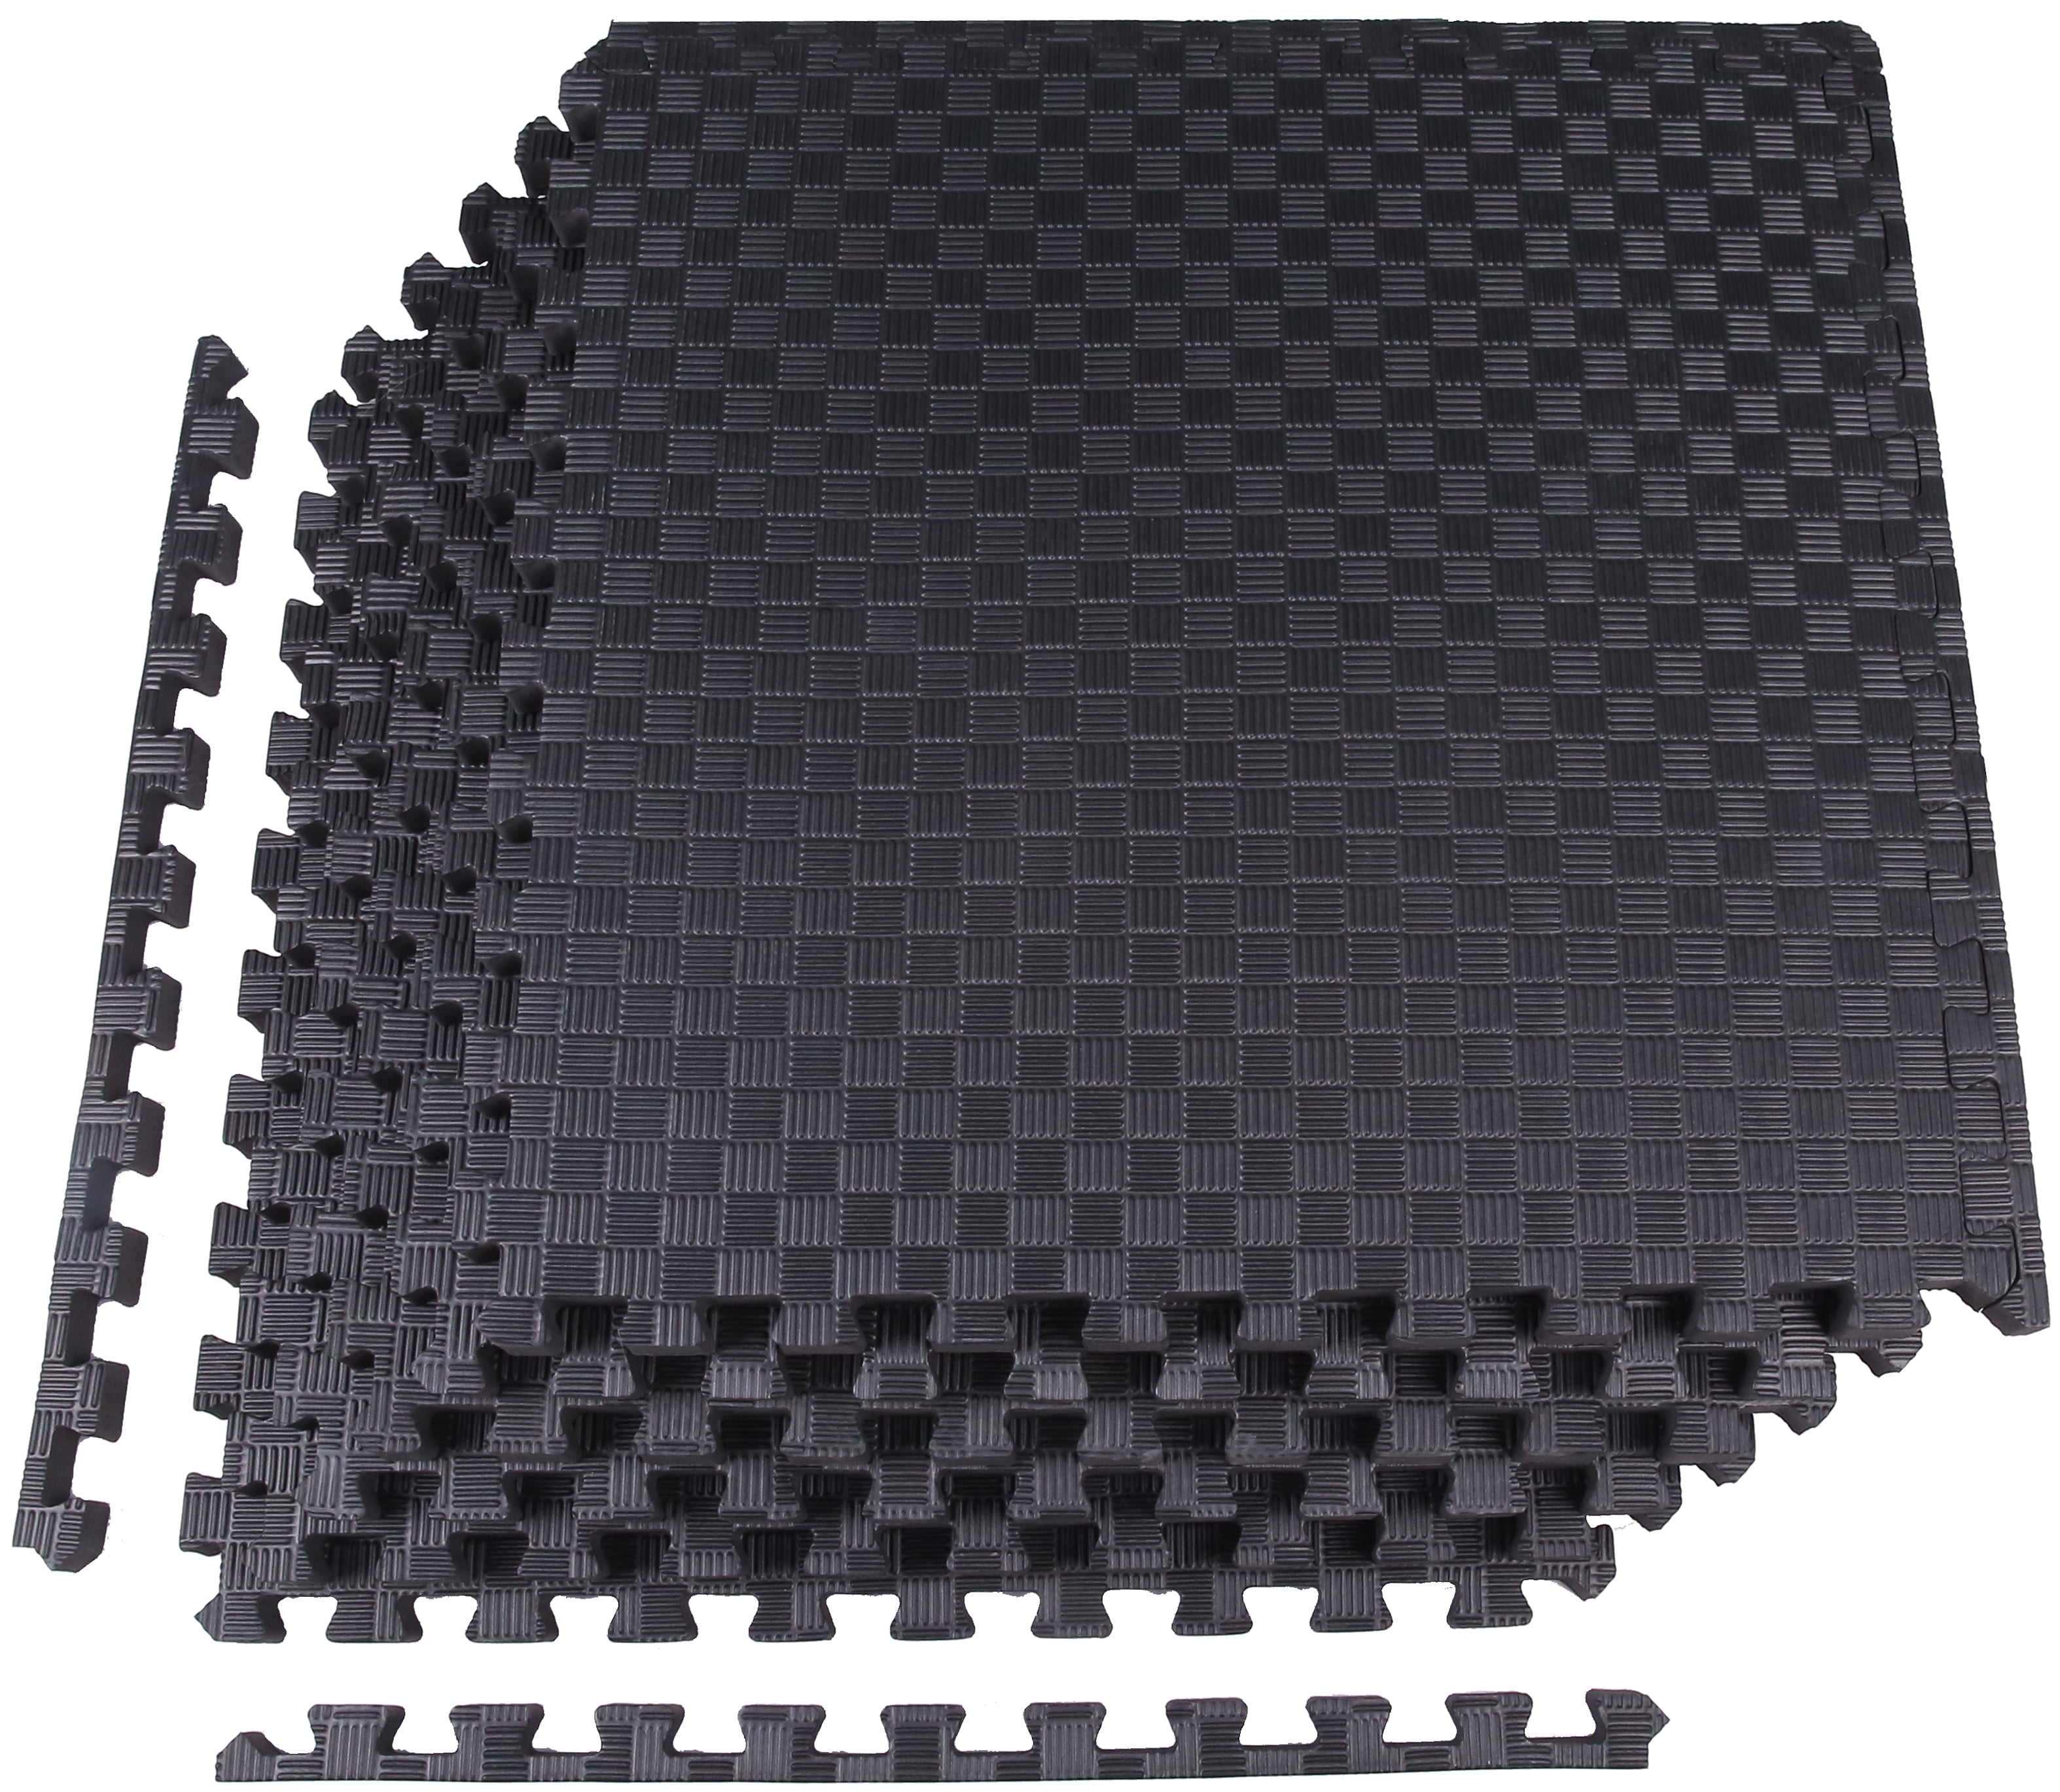 Exercise Mat for Home Workout Baby Play Mat for Playing  QC-Custom1b6 qqpp Customized 1 Color EVA Rubber 6 Tiles Interlocking Puzzle Foam Floor Mats 